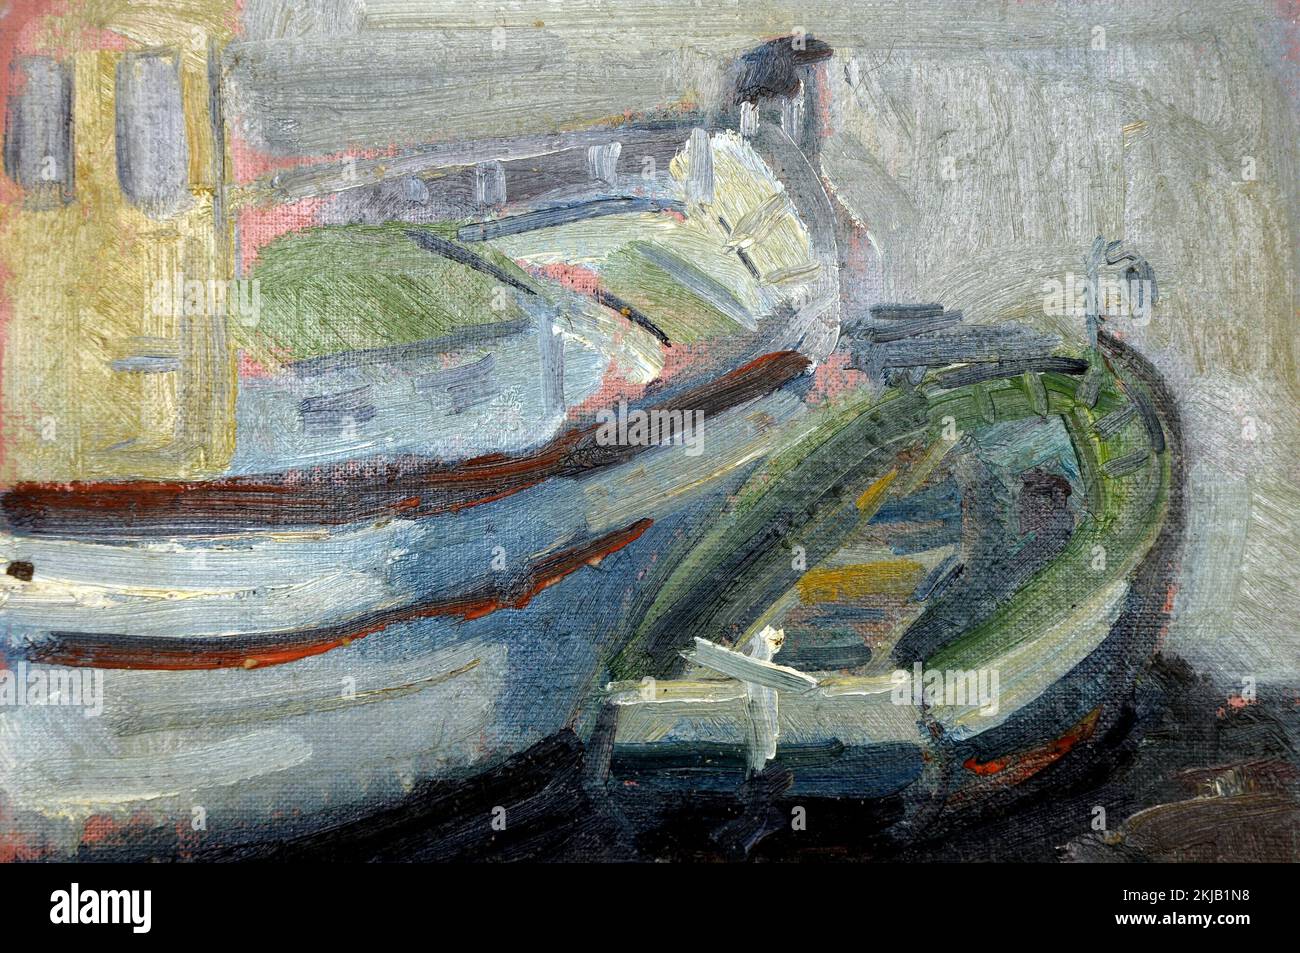 oil painting of boats on tablex, detail of boats painted in oil, oil, artistic, art, nautical theme, boats, painting, Stock Photo